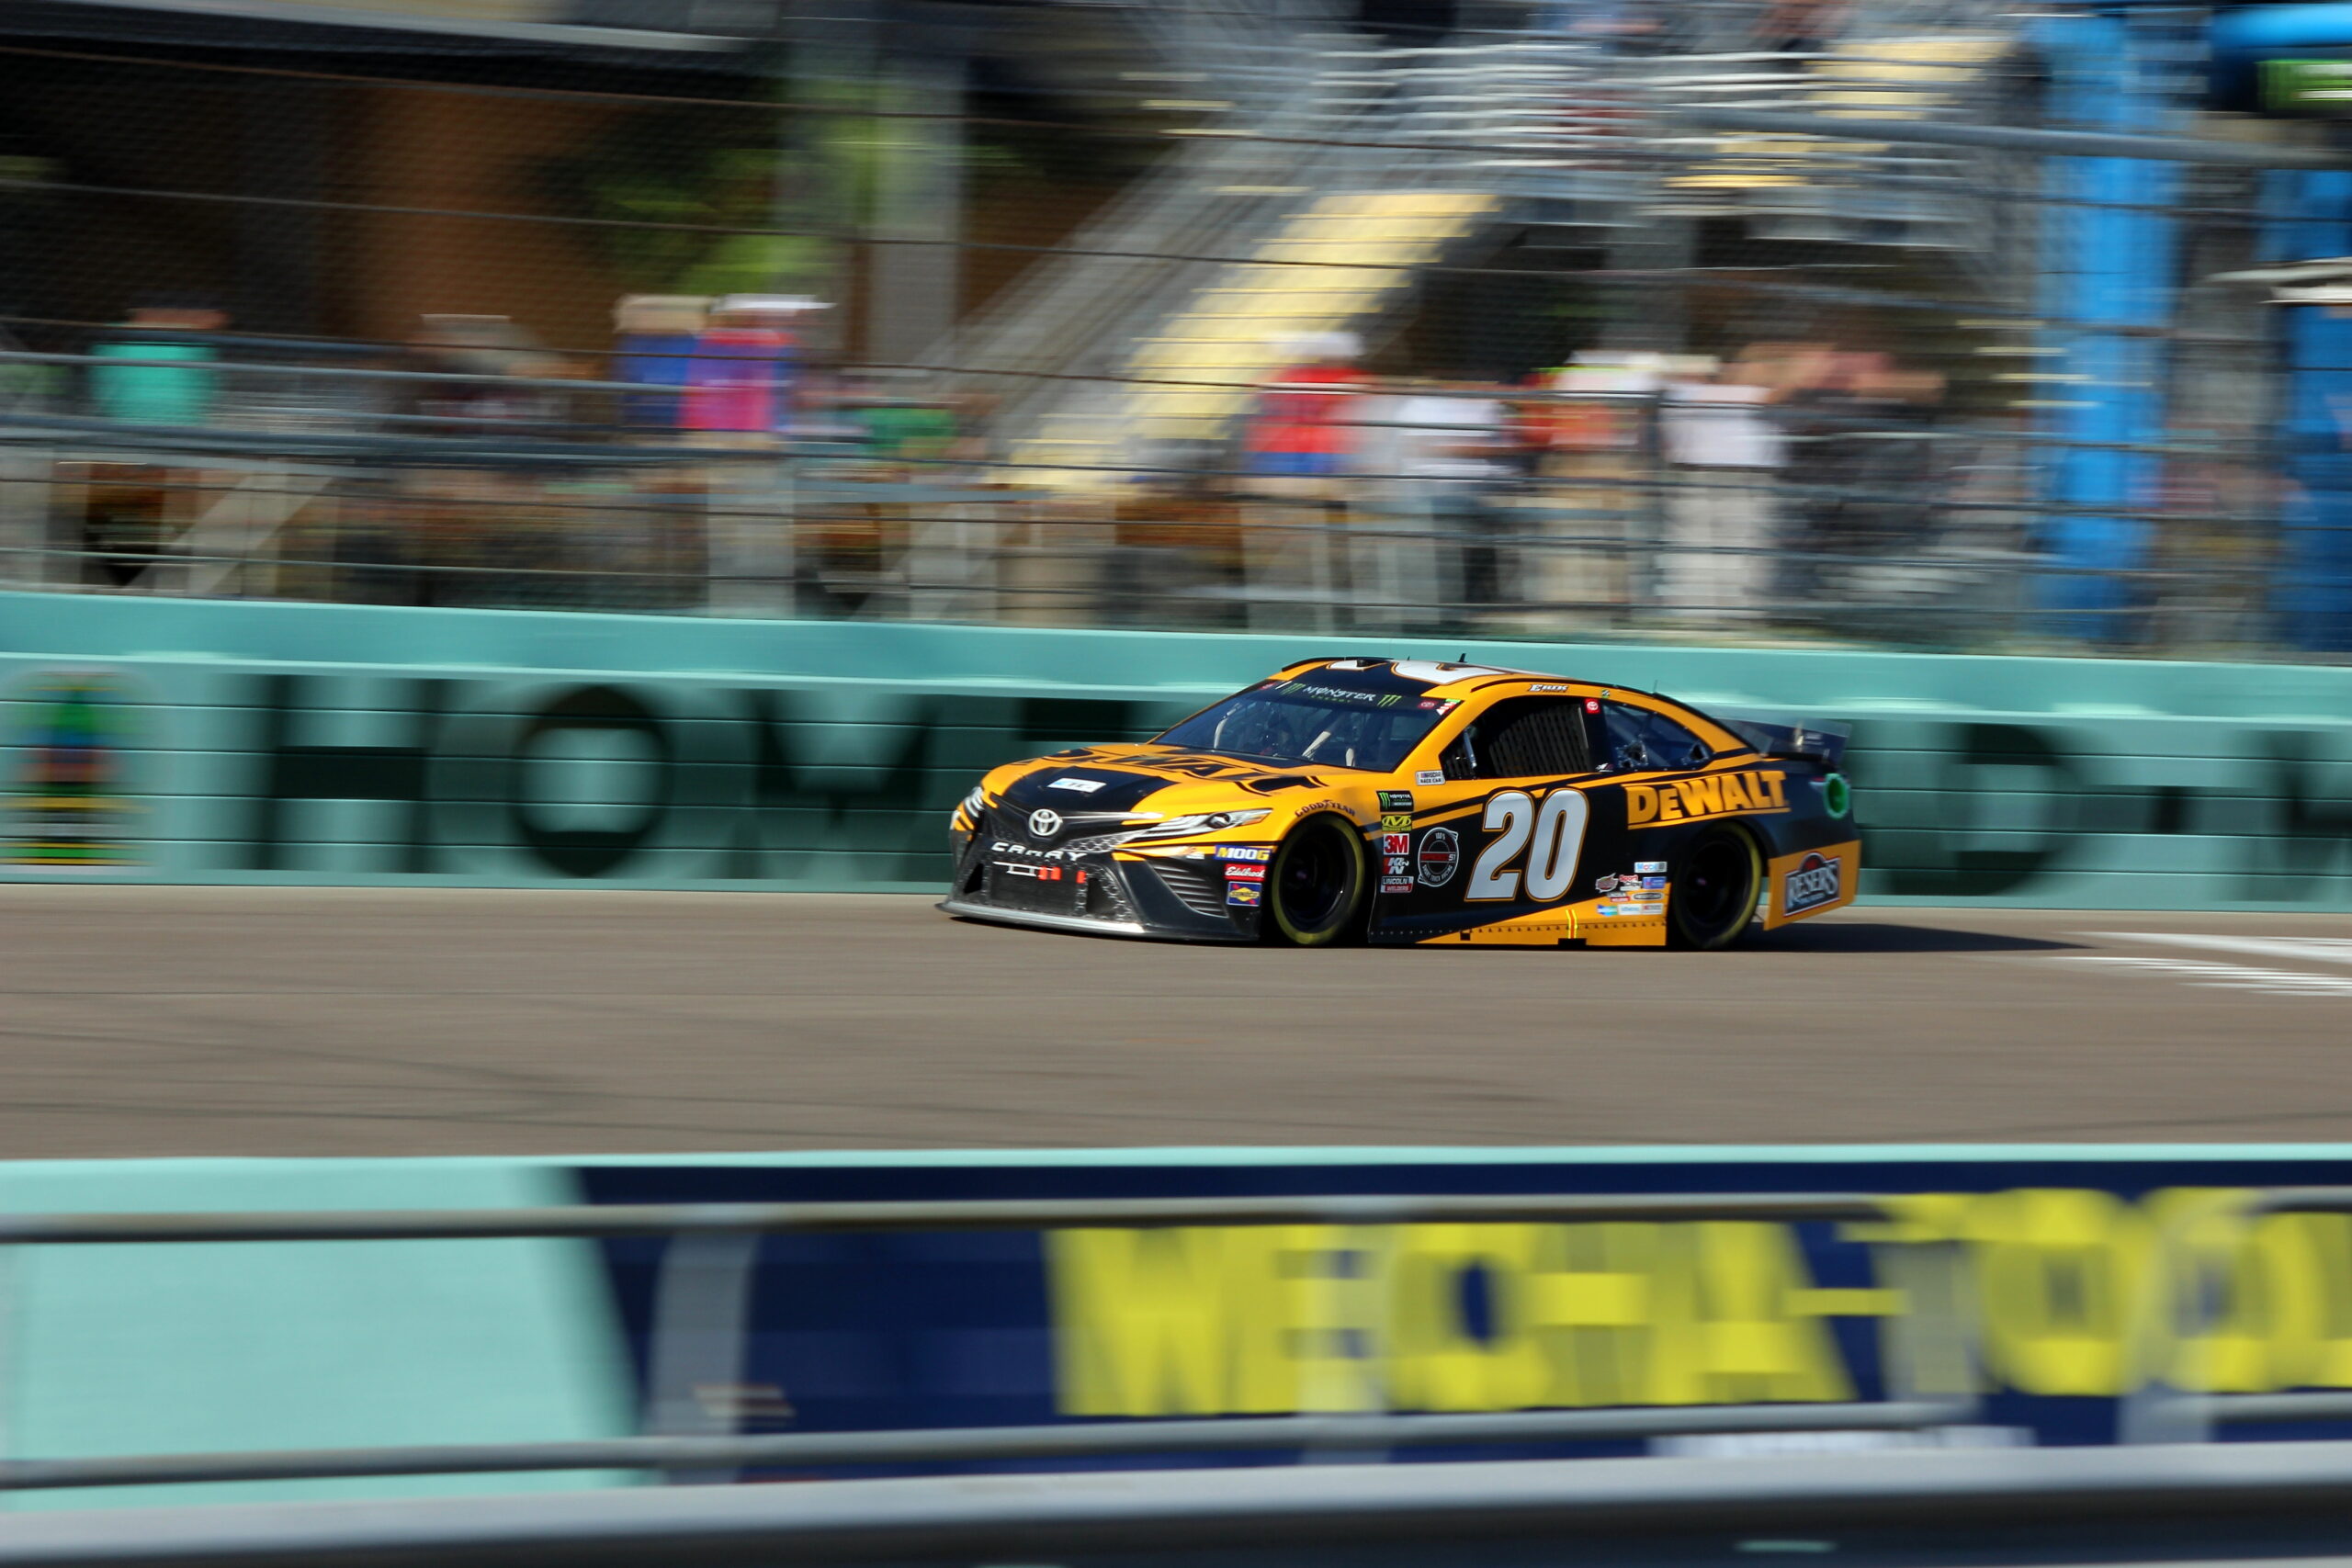 Despite some rocky finishes, Driver 20 posted some solid results in the Playoffs. (Photo Credit: Josh Jones/TPF)